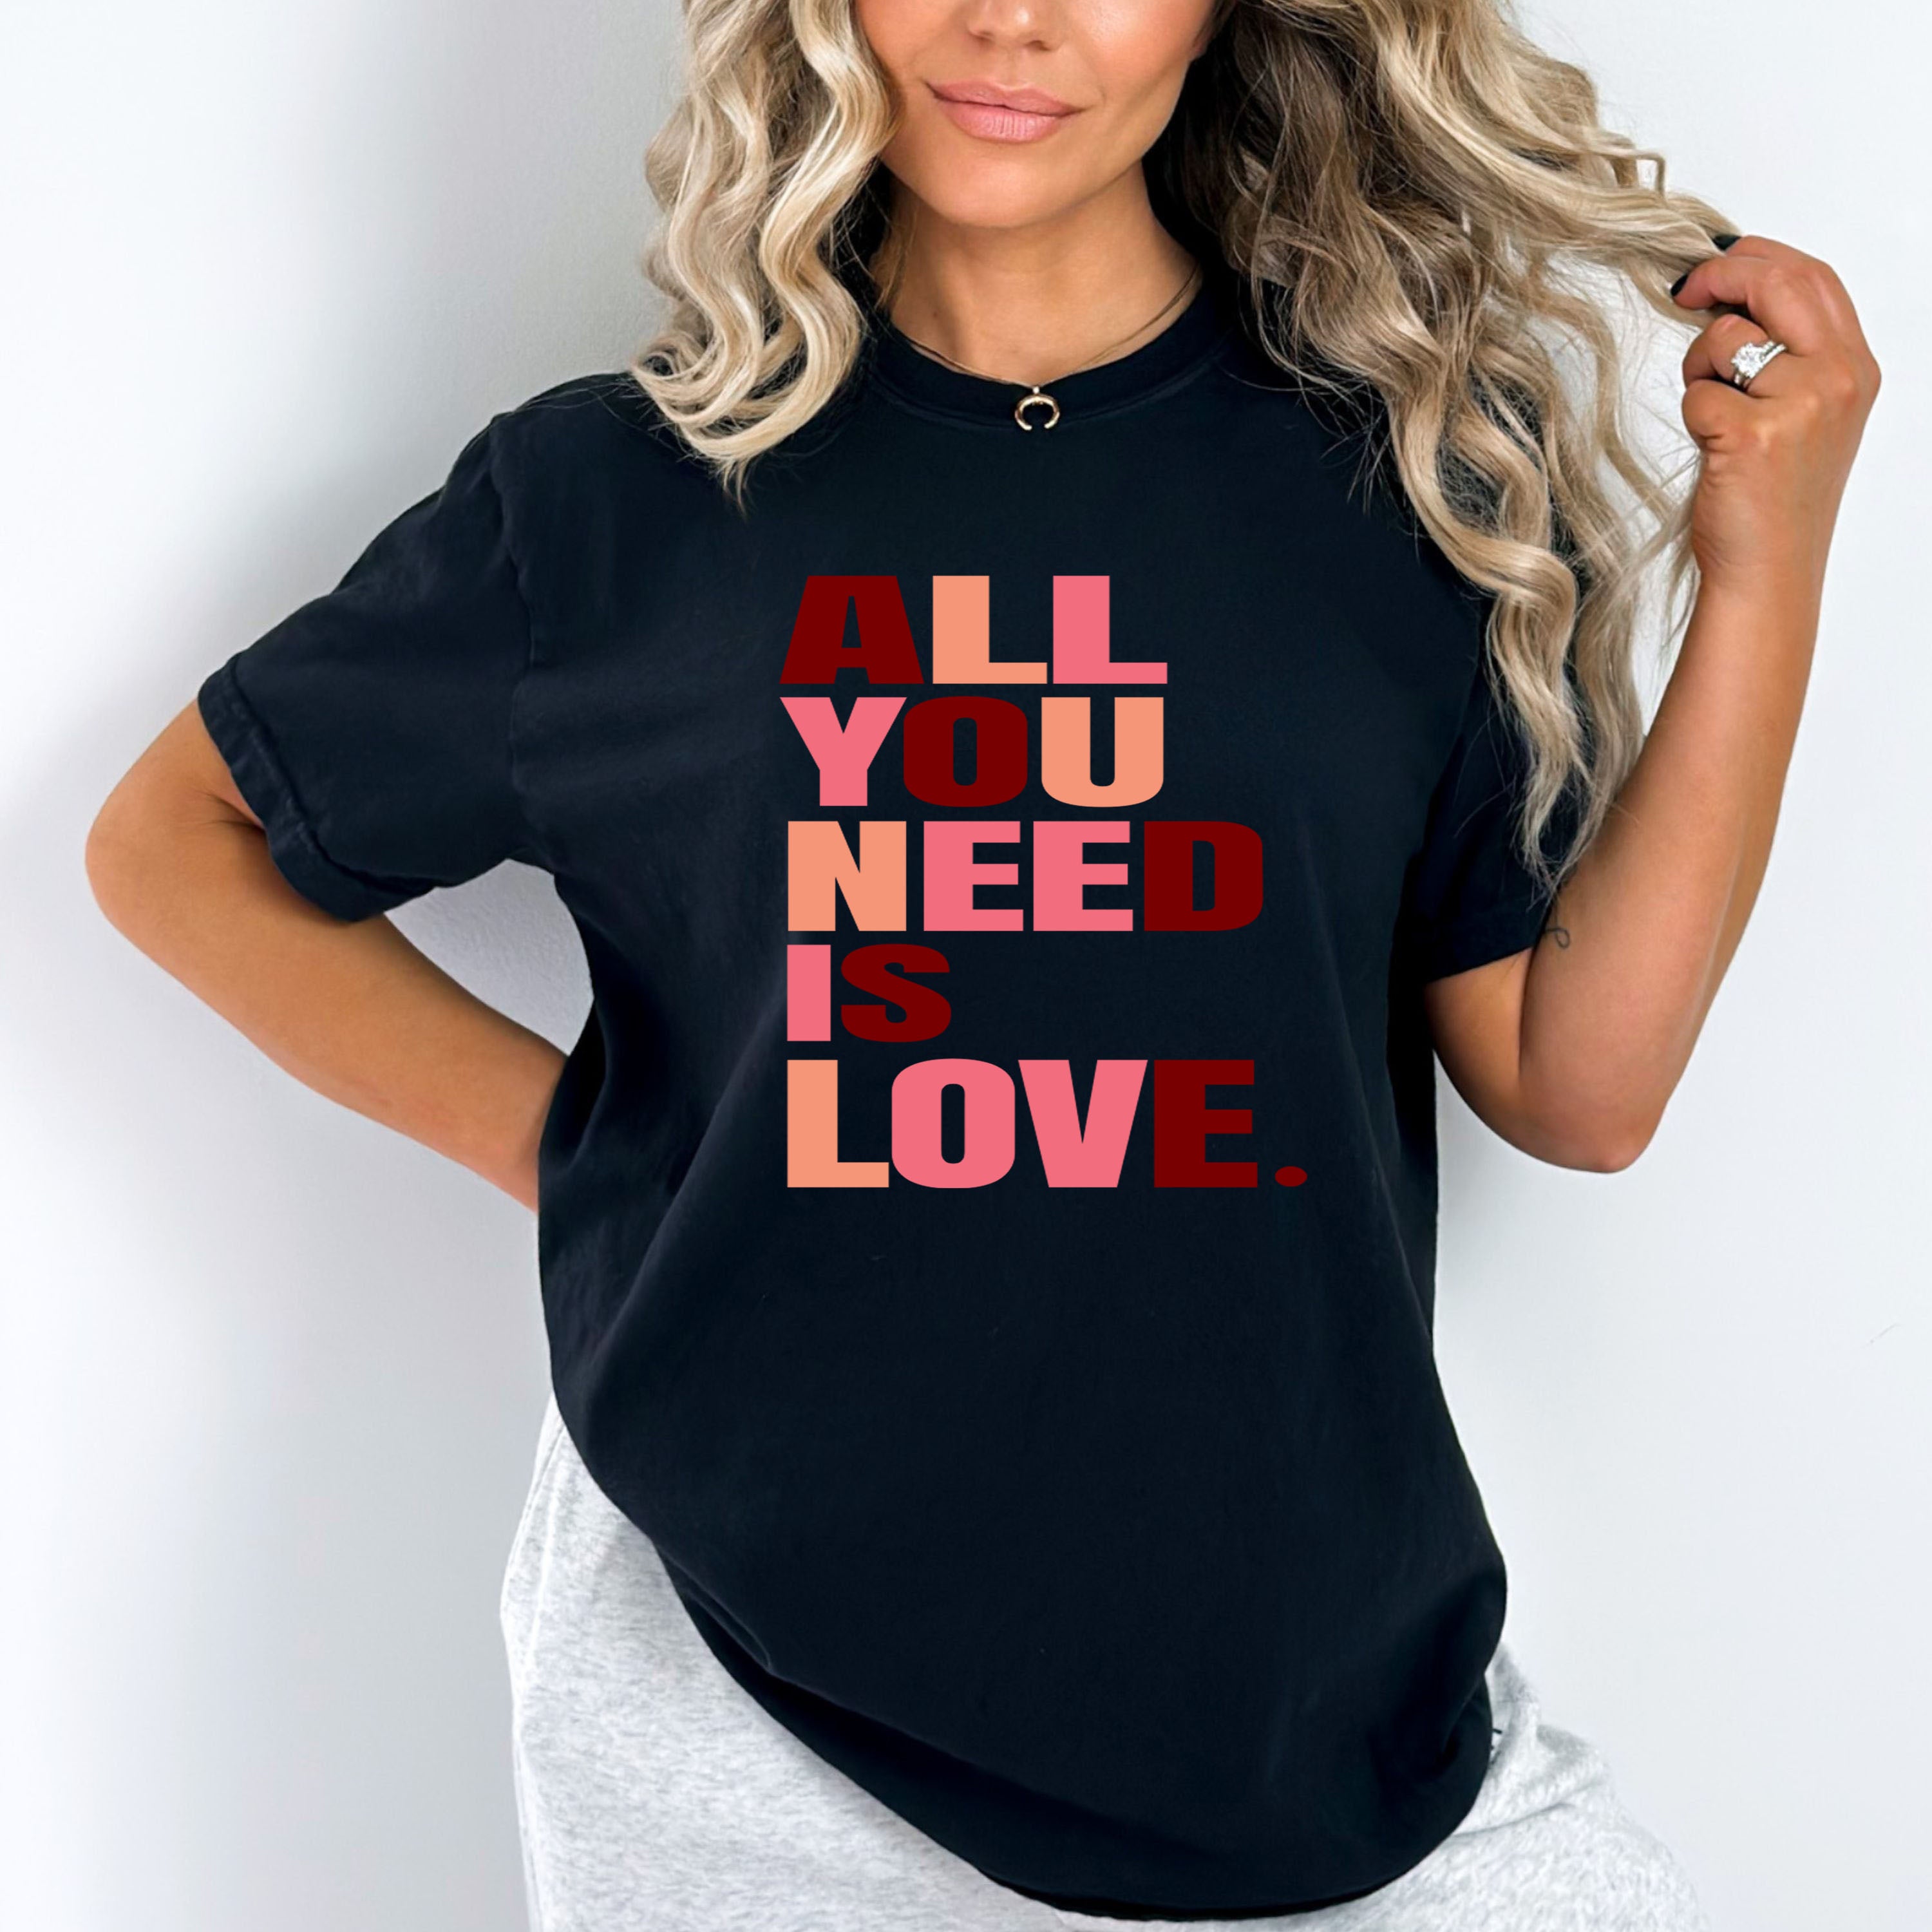 "All You Need Is Love" T-Shirt